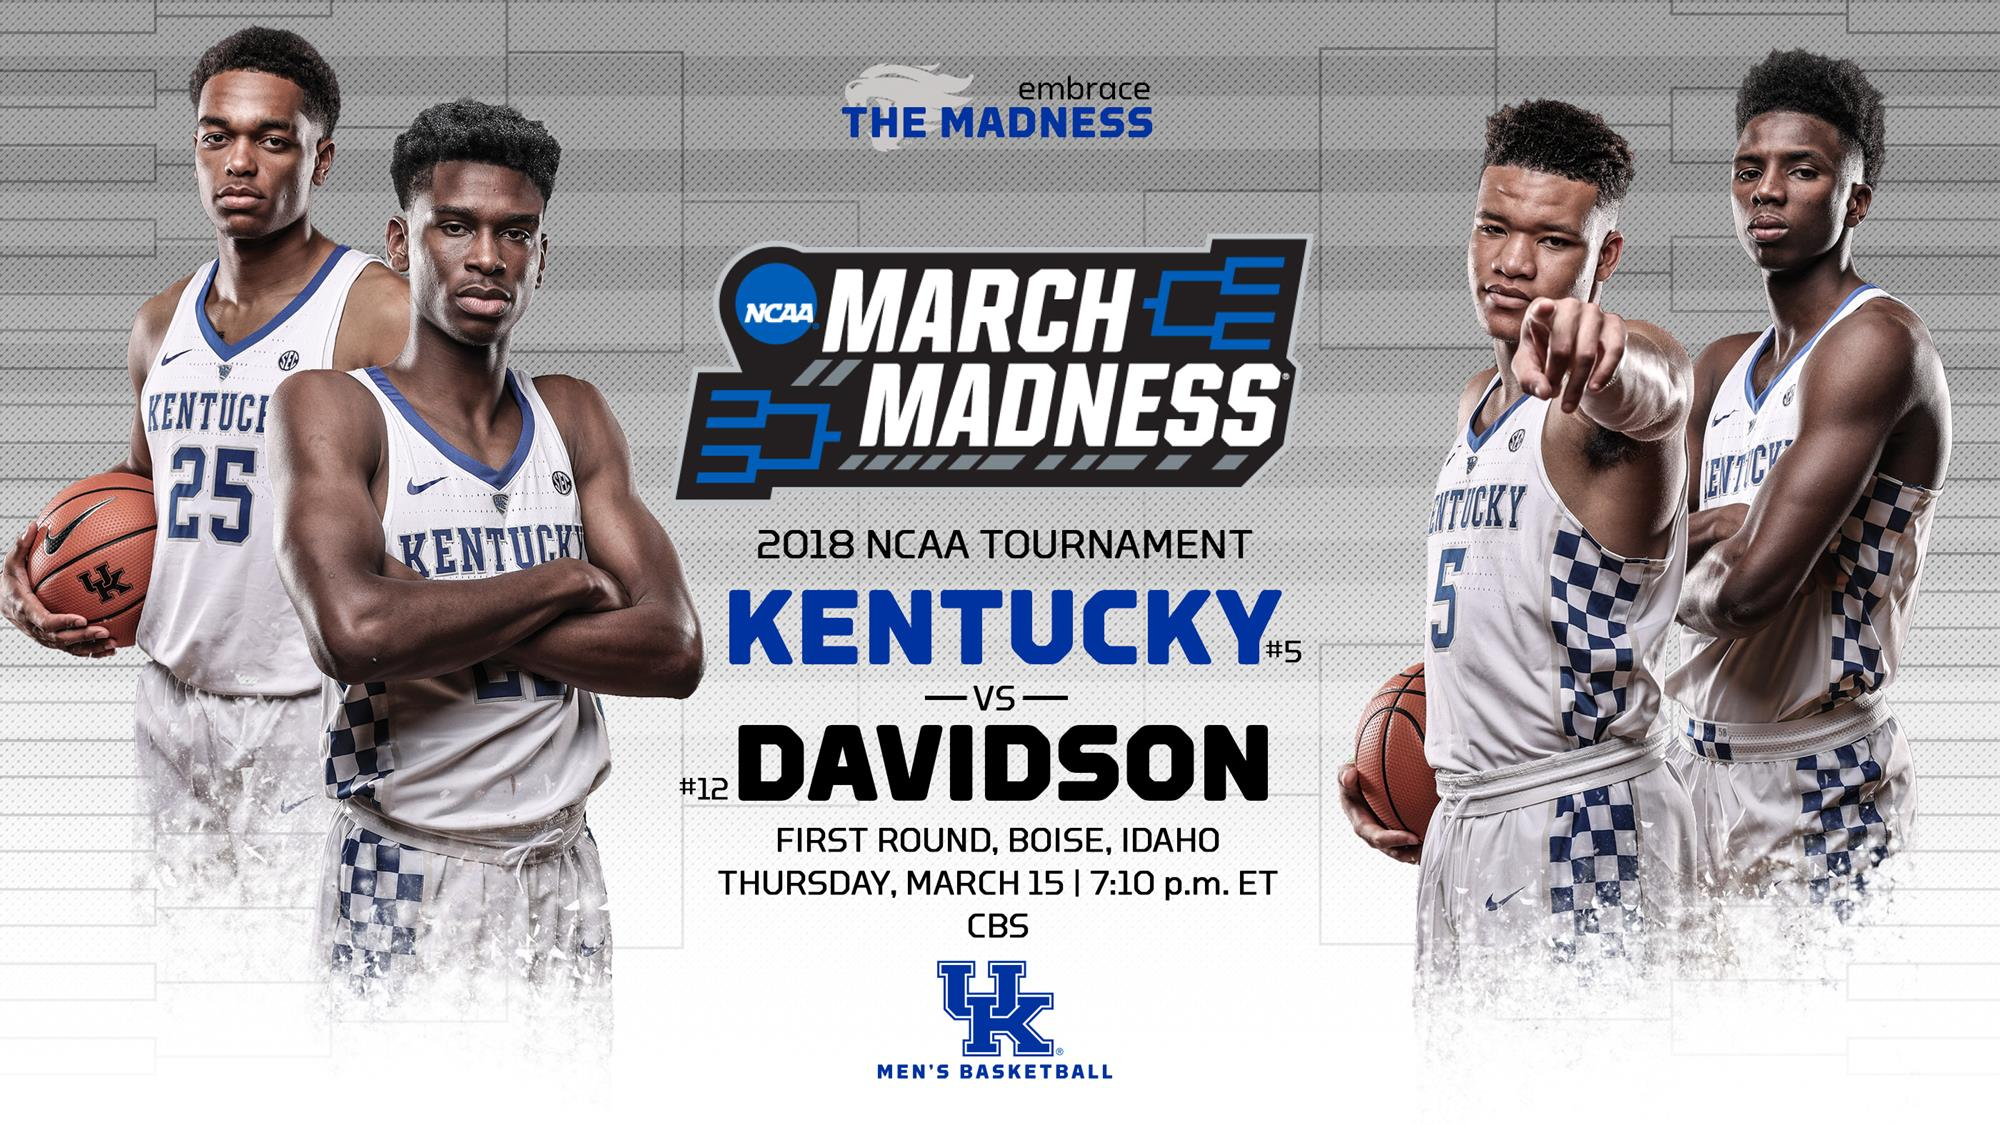 Kentucky Selected for Record 57th NCAA Tournament